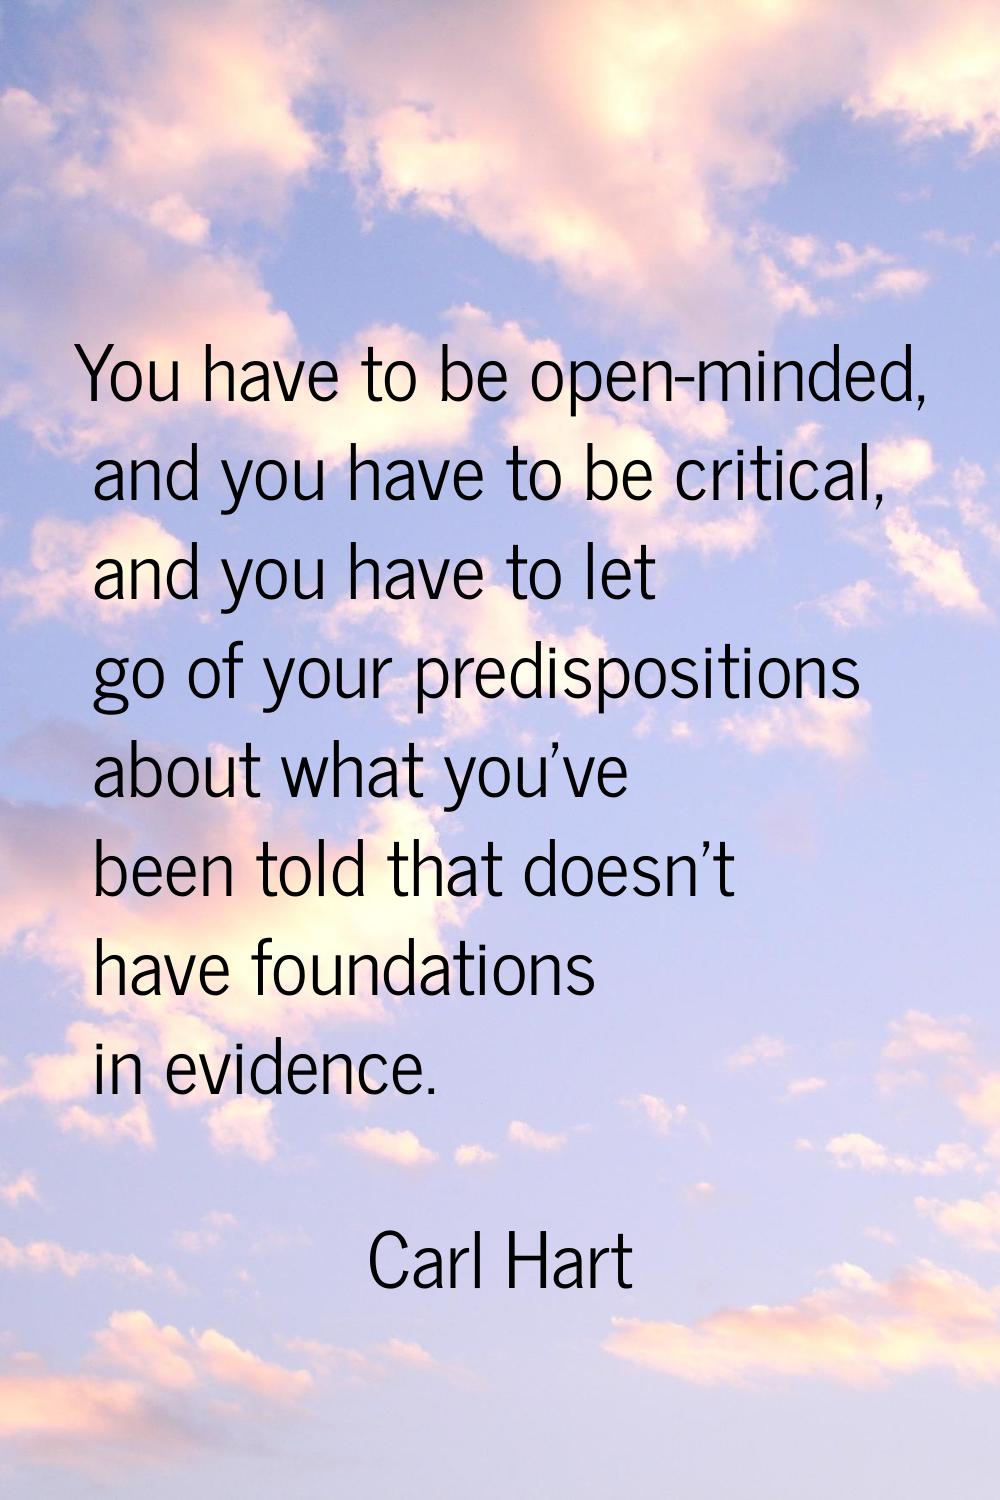 You have to be open-minded, and you have to be critical, and you have to let go of your predisposit